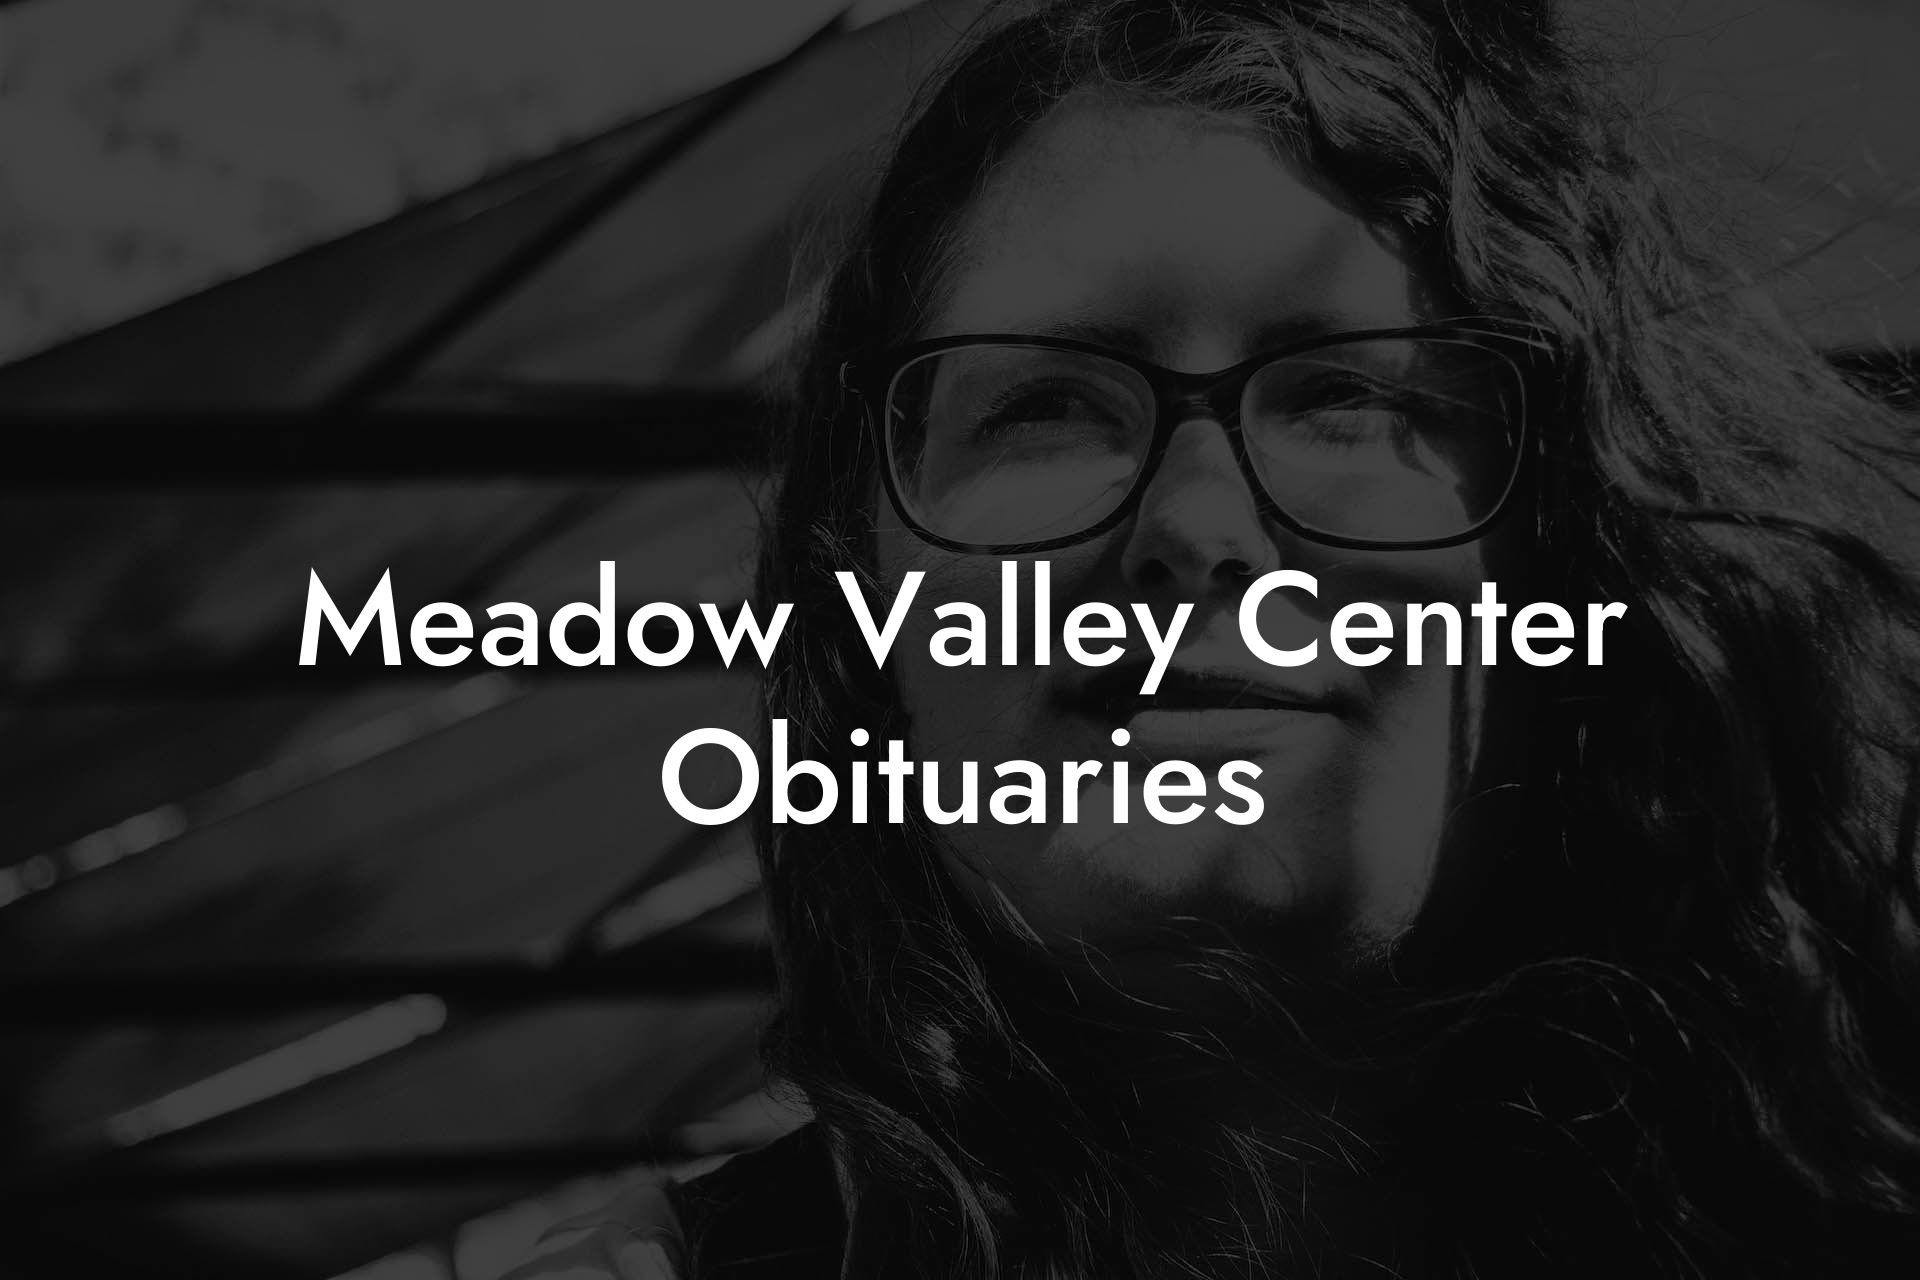 Meadow Valley Center Obituaries